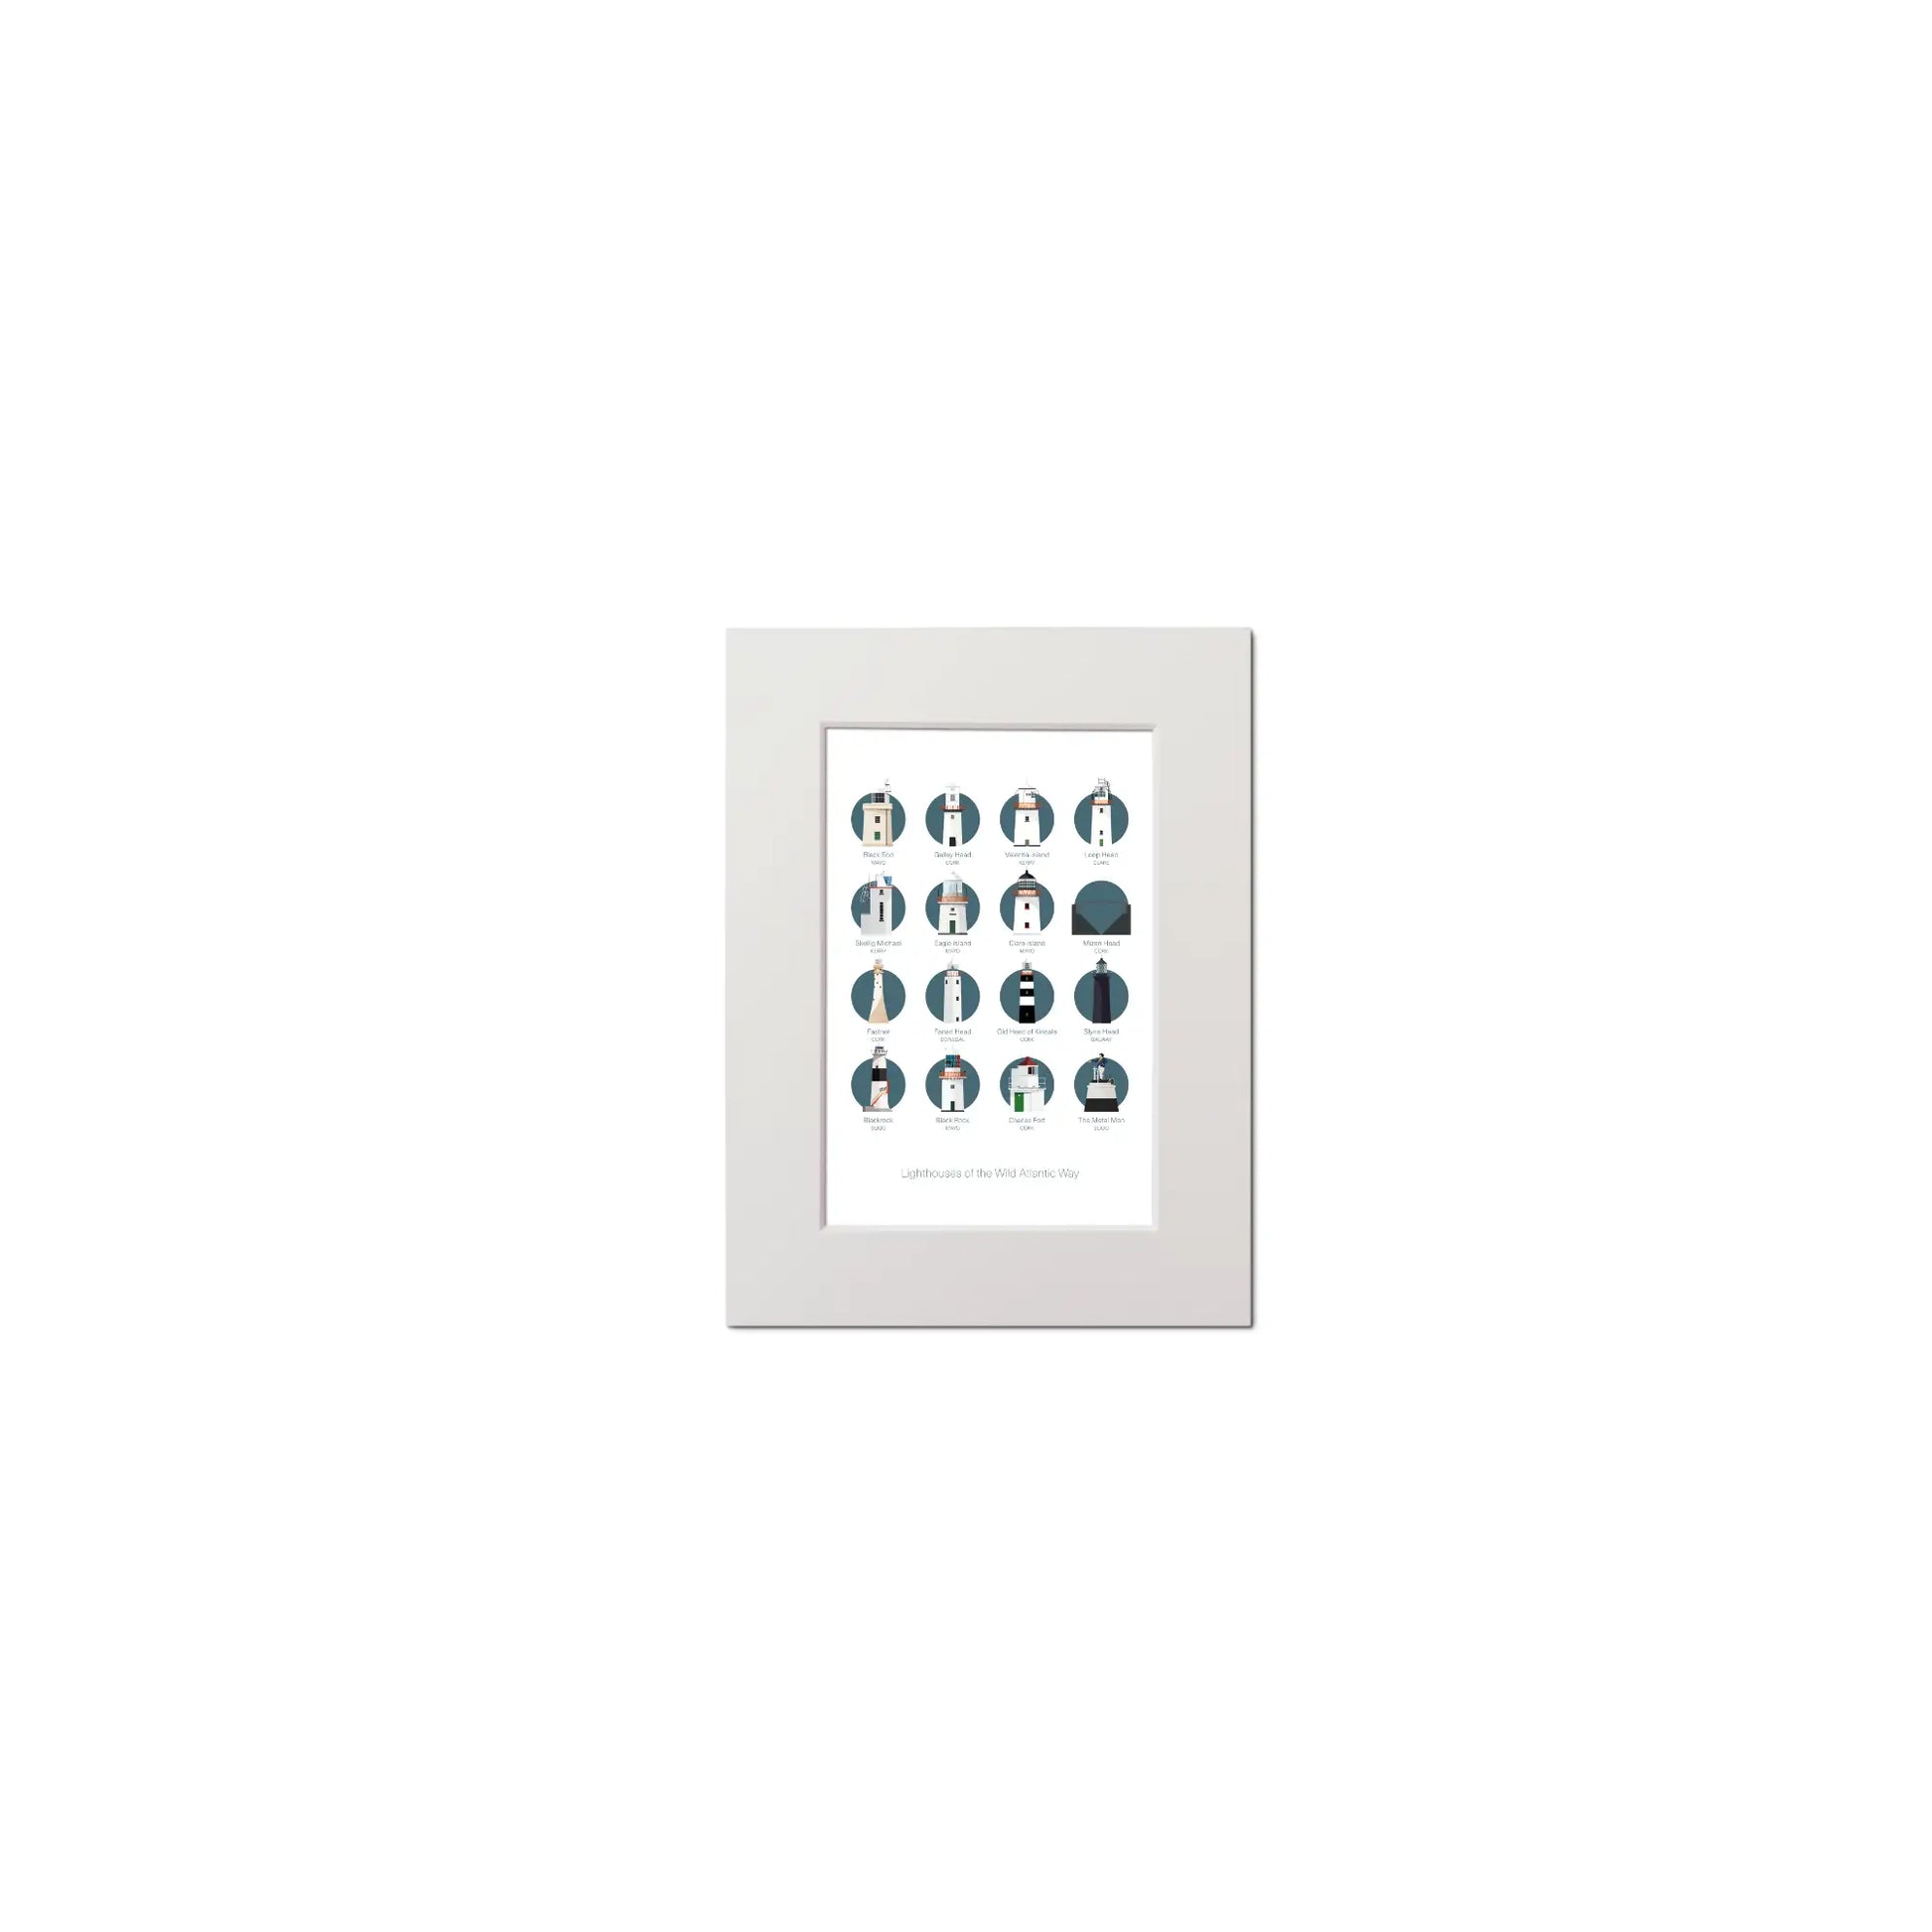 Illustration of the Iconic lighthouses along the Wild Atlantic Way on the West Coast of Ireland  on a white background inside light blue squares, mounted and measuring 15x20cm.